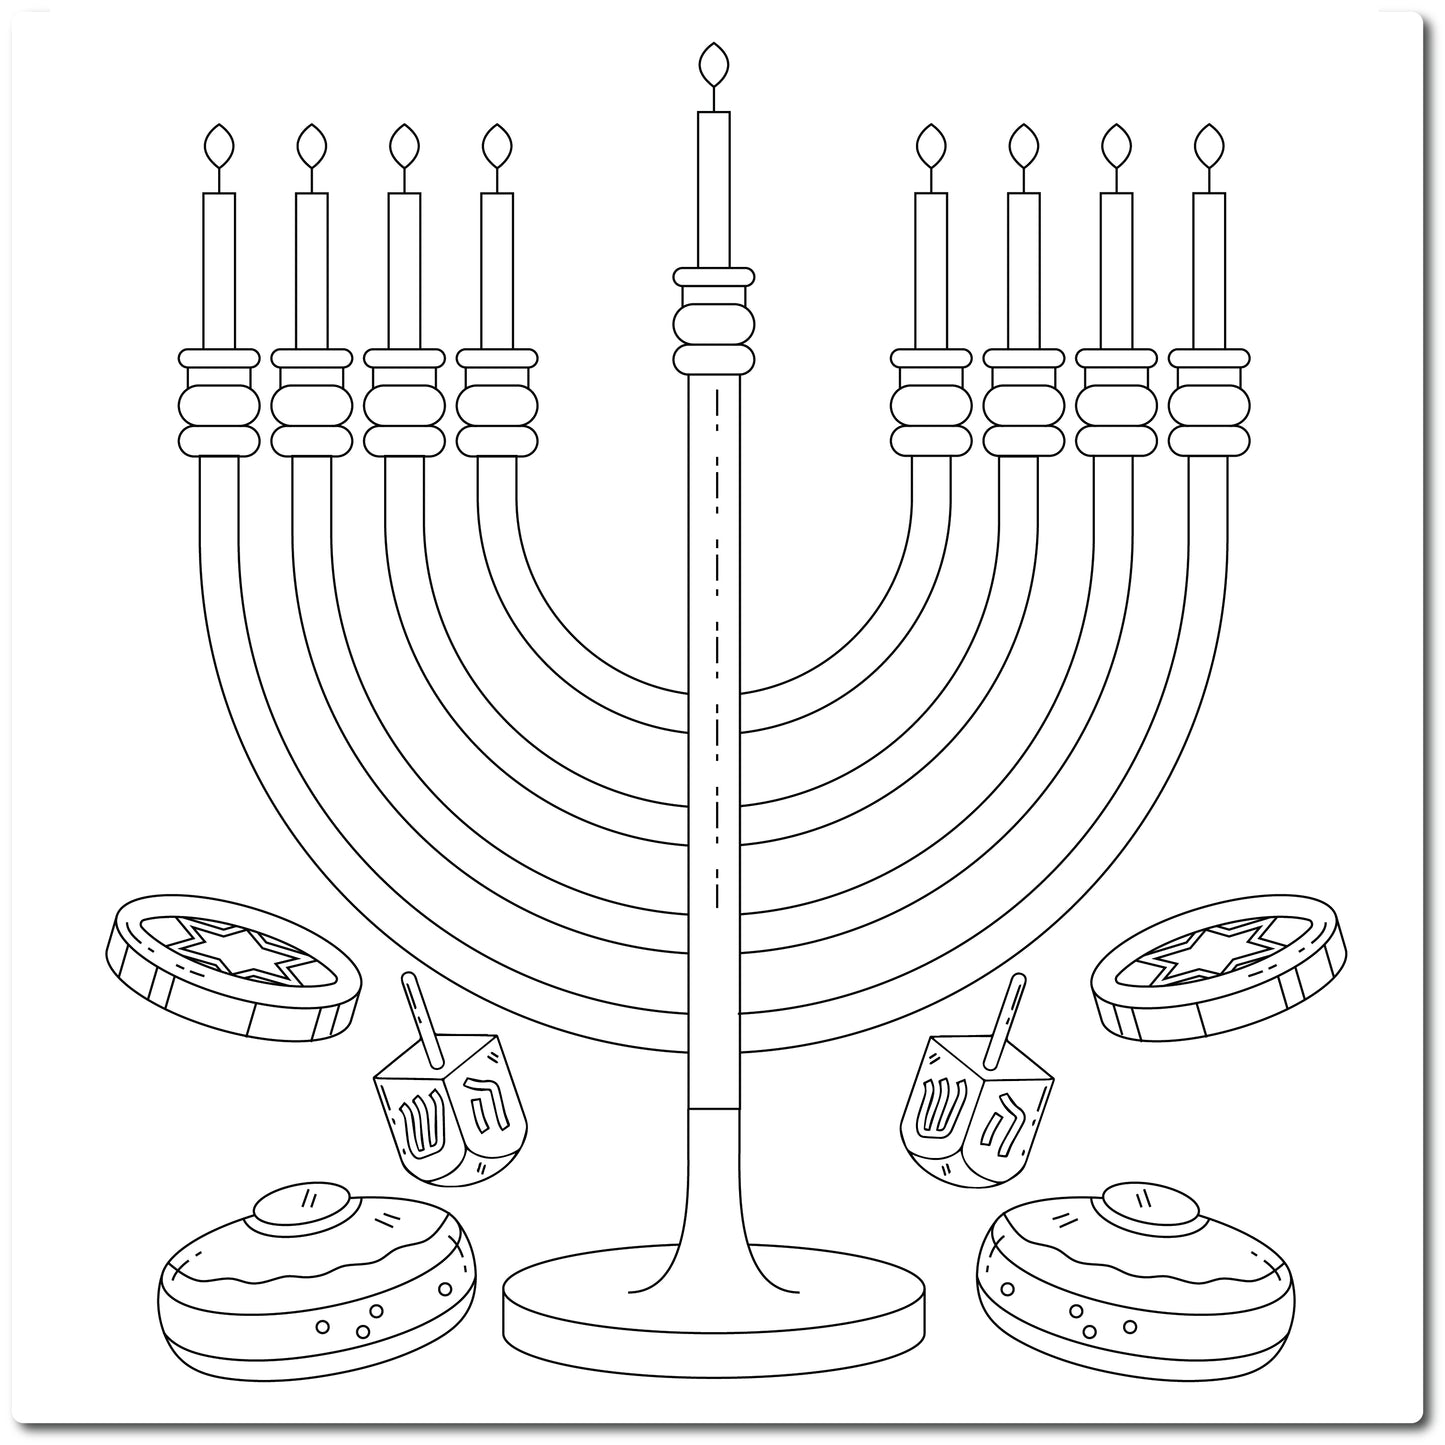 Magnet Me Up Color Your Own Hanukkah Menorah with Coins, Dreidels and Sufganiyah Donuts, DIY Coloring Holiday Magnet Decal for Chanukkah, 6x6 inch, Creative Artistic Gift Idea, Perfect for Kids